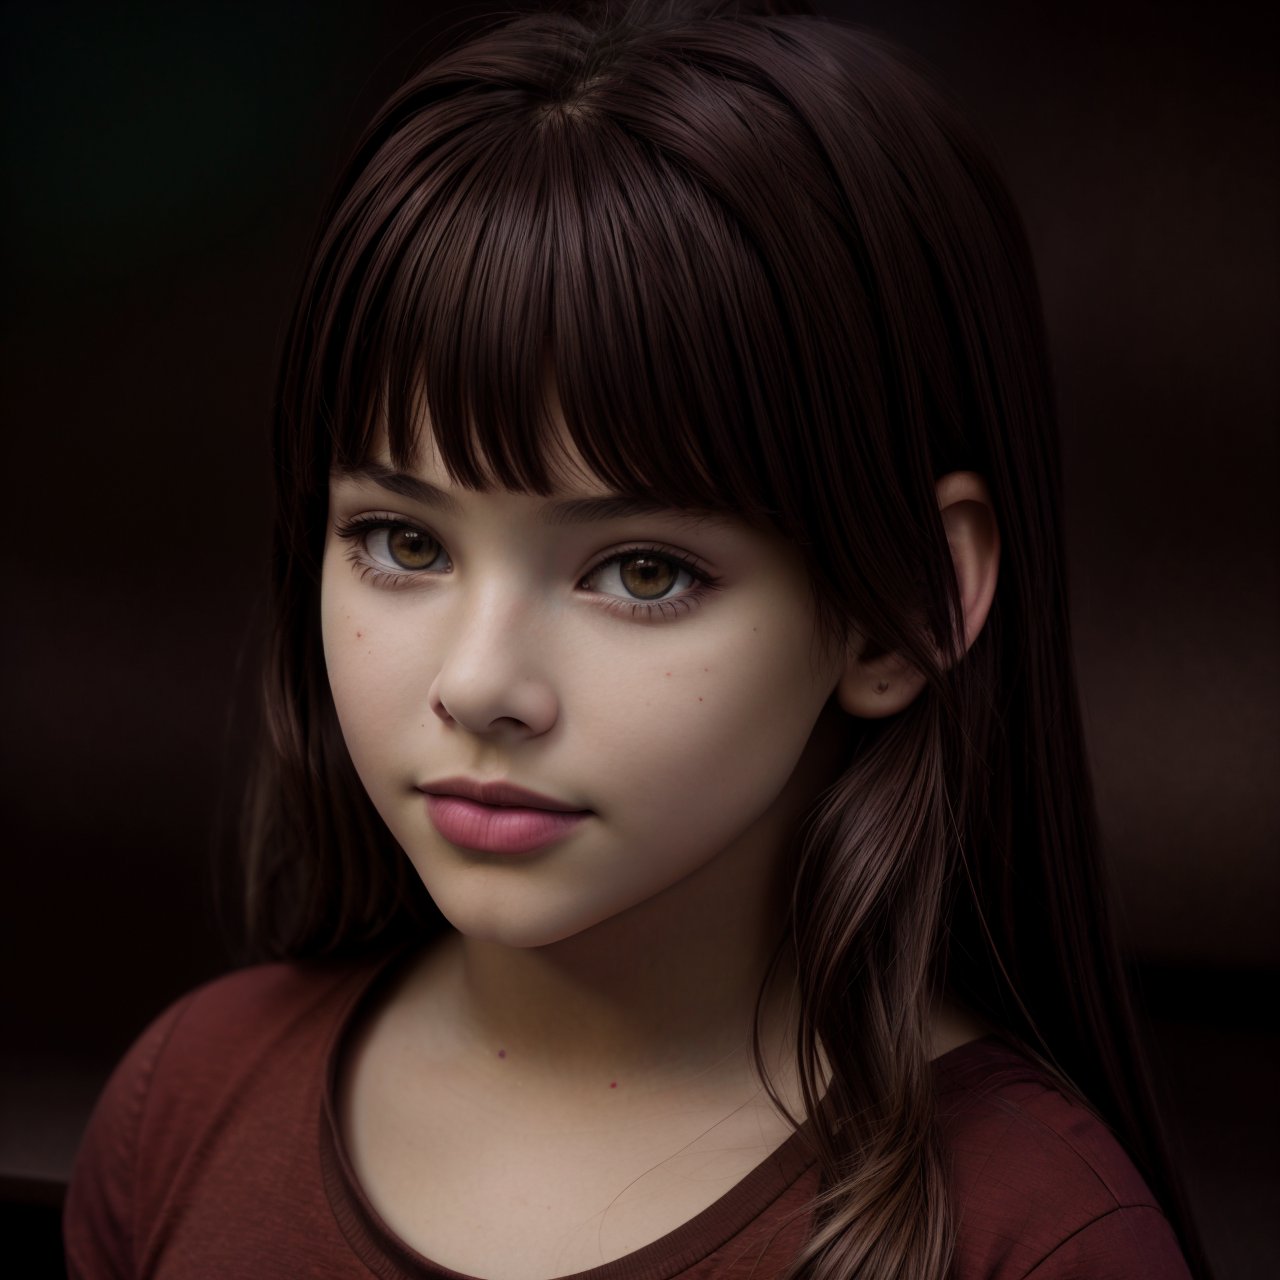 (masterpiece:1.3), dolly short, close up of charming (AIDA_LoRA_LG2014:1.05) <lora:AIDA_LoRA_LG2014:0.72> wearing a red t-shirt, little girl, pretty face, intimate, cinematic, studio photo, studio photo, kkw-ph1, hdr, f1.8, (colorful:1.1), (deep brown background:1.5)